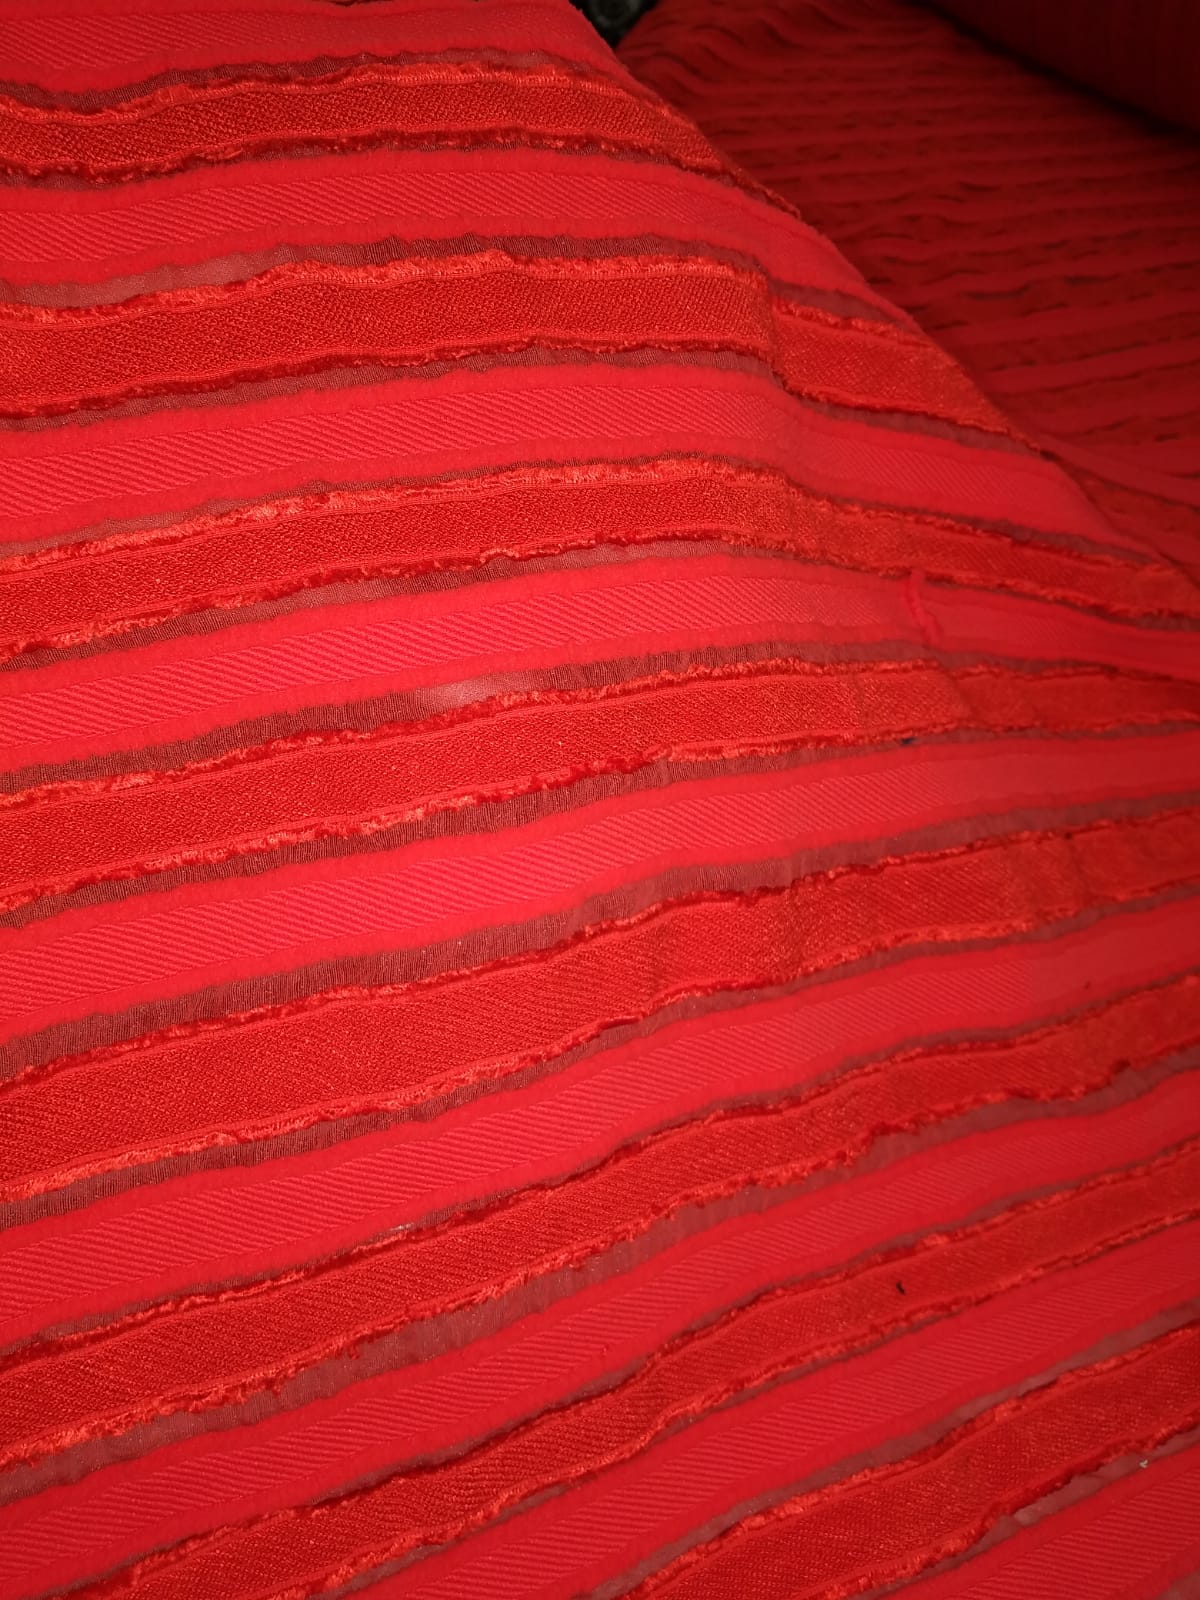 Lela Rose Italian Striped Novelty on Poly Organza - Red